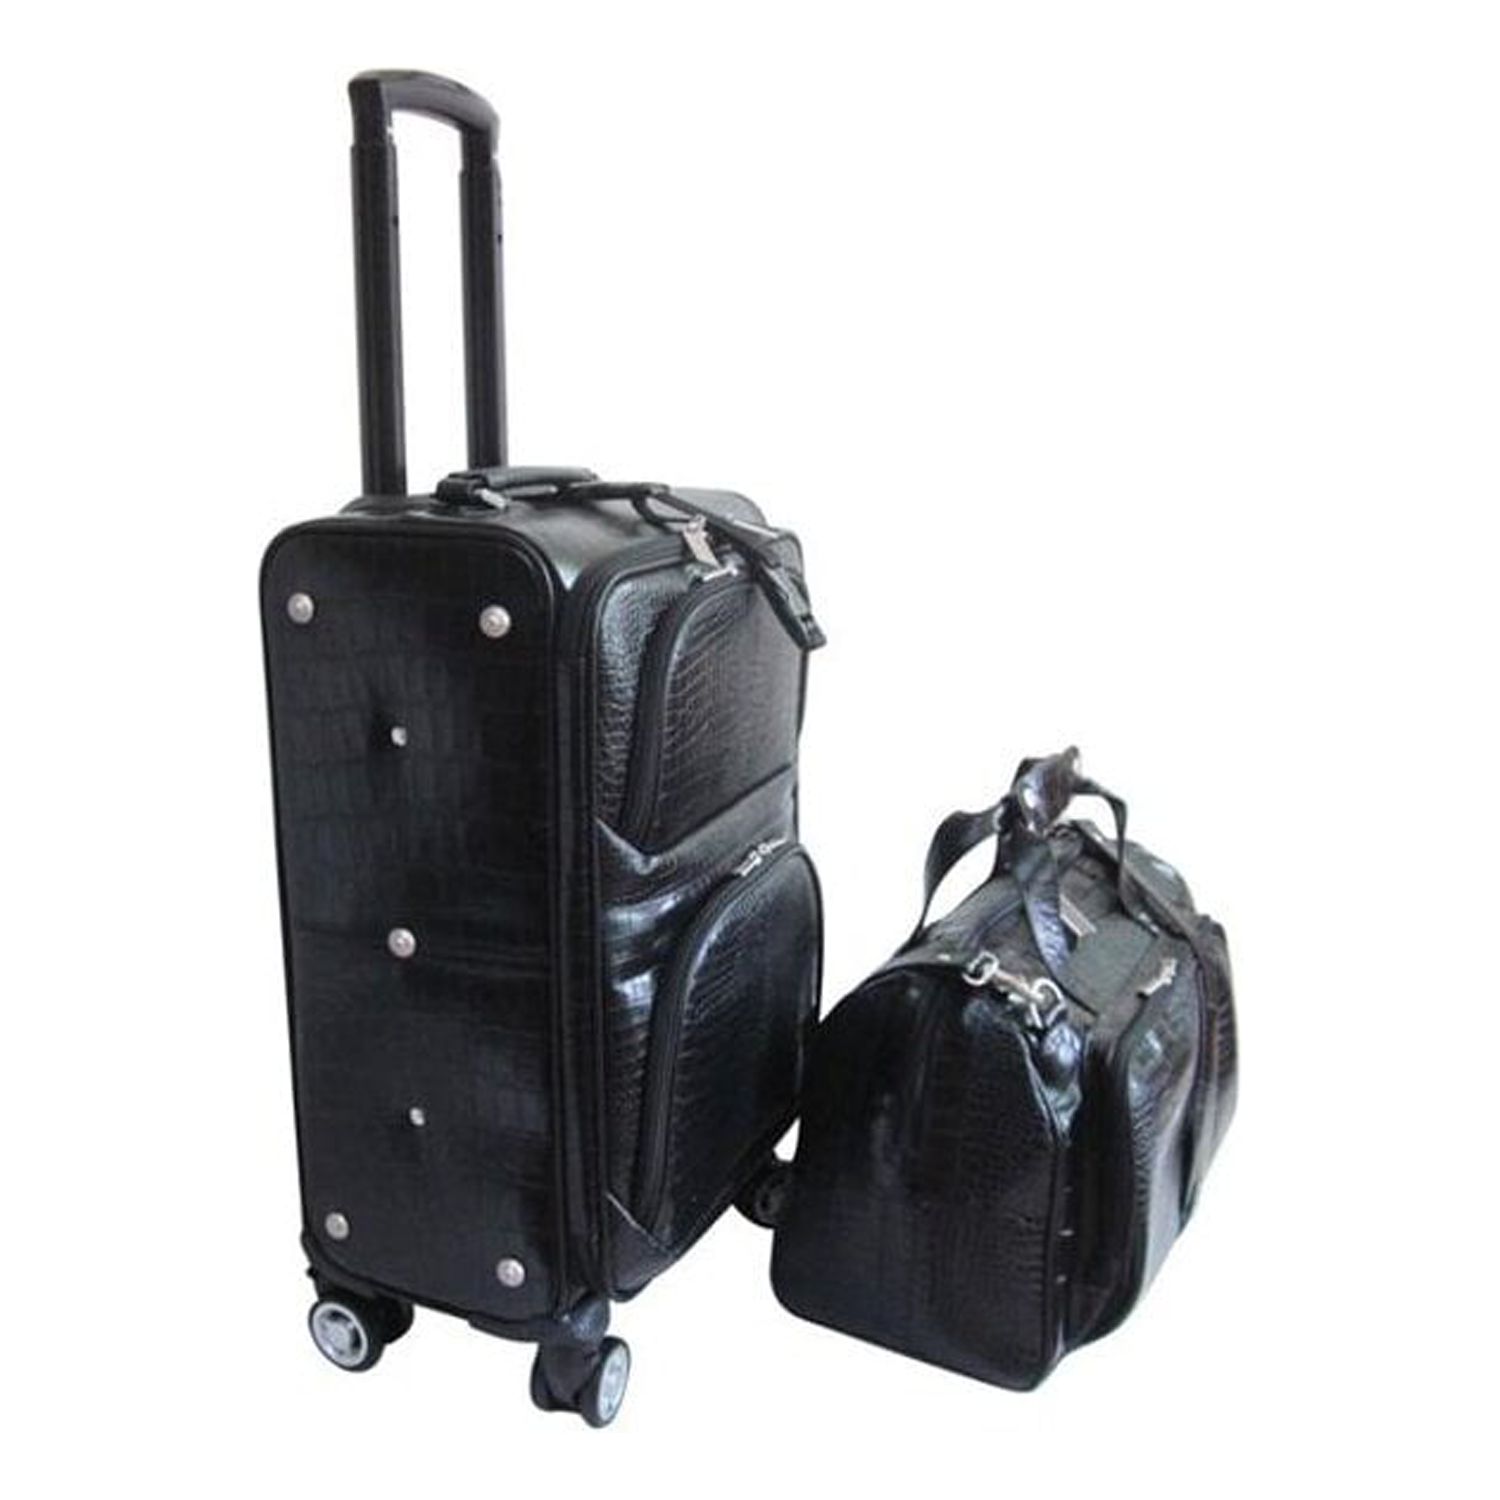 Black Leather Croco-Print 2-Piece Carry-On Spinner Luggage Set - image 2 of 4